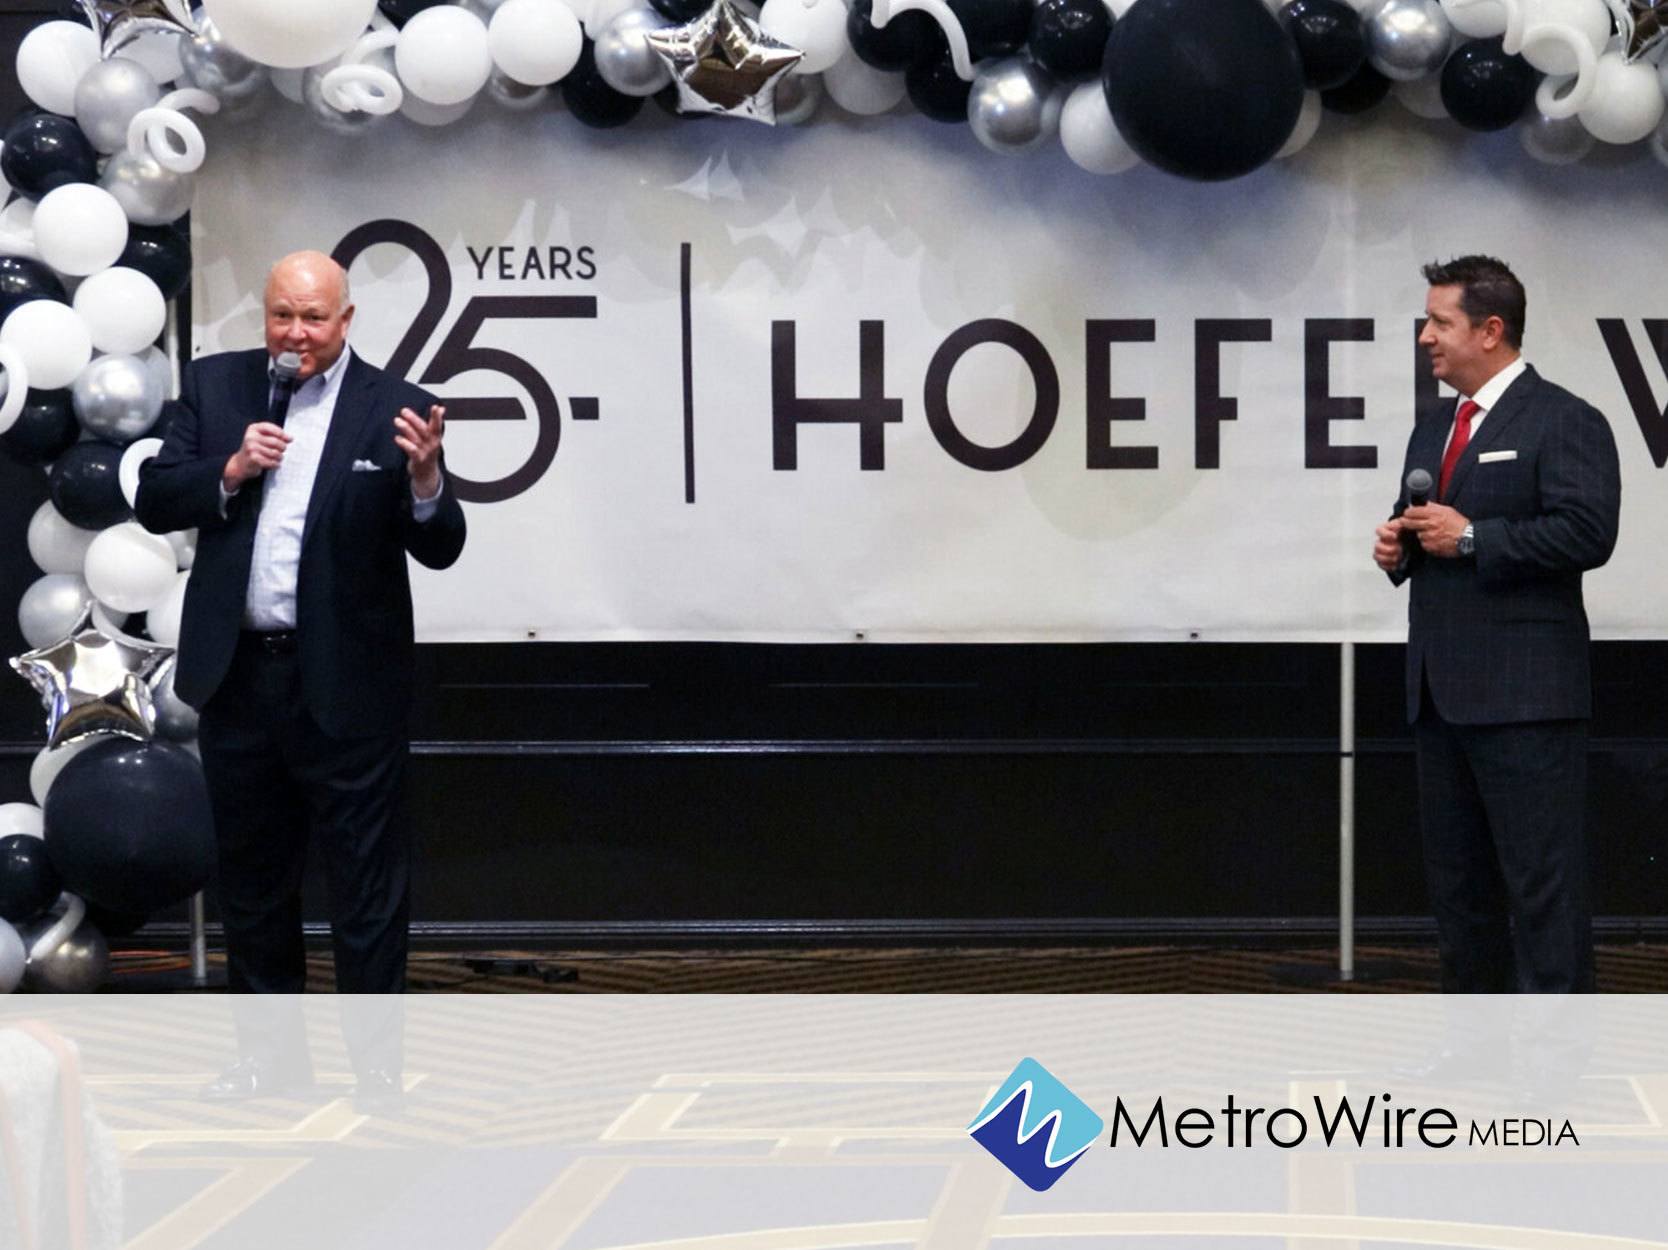 Hoefer Welker debuts on firm’s 25th Anniversary